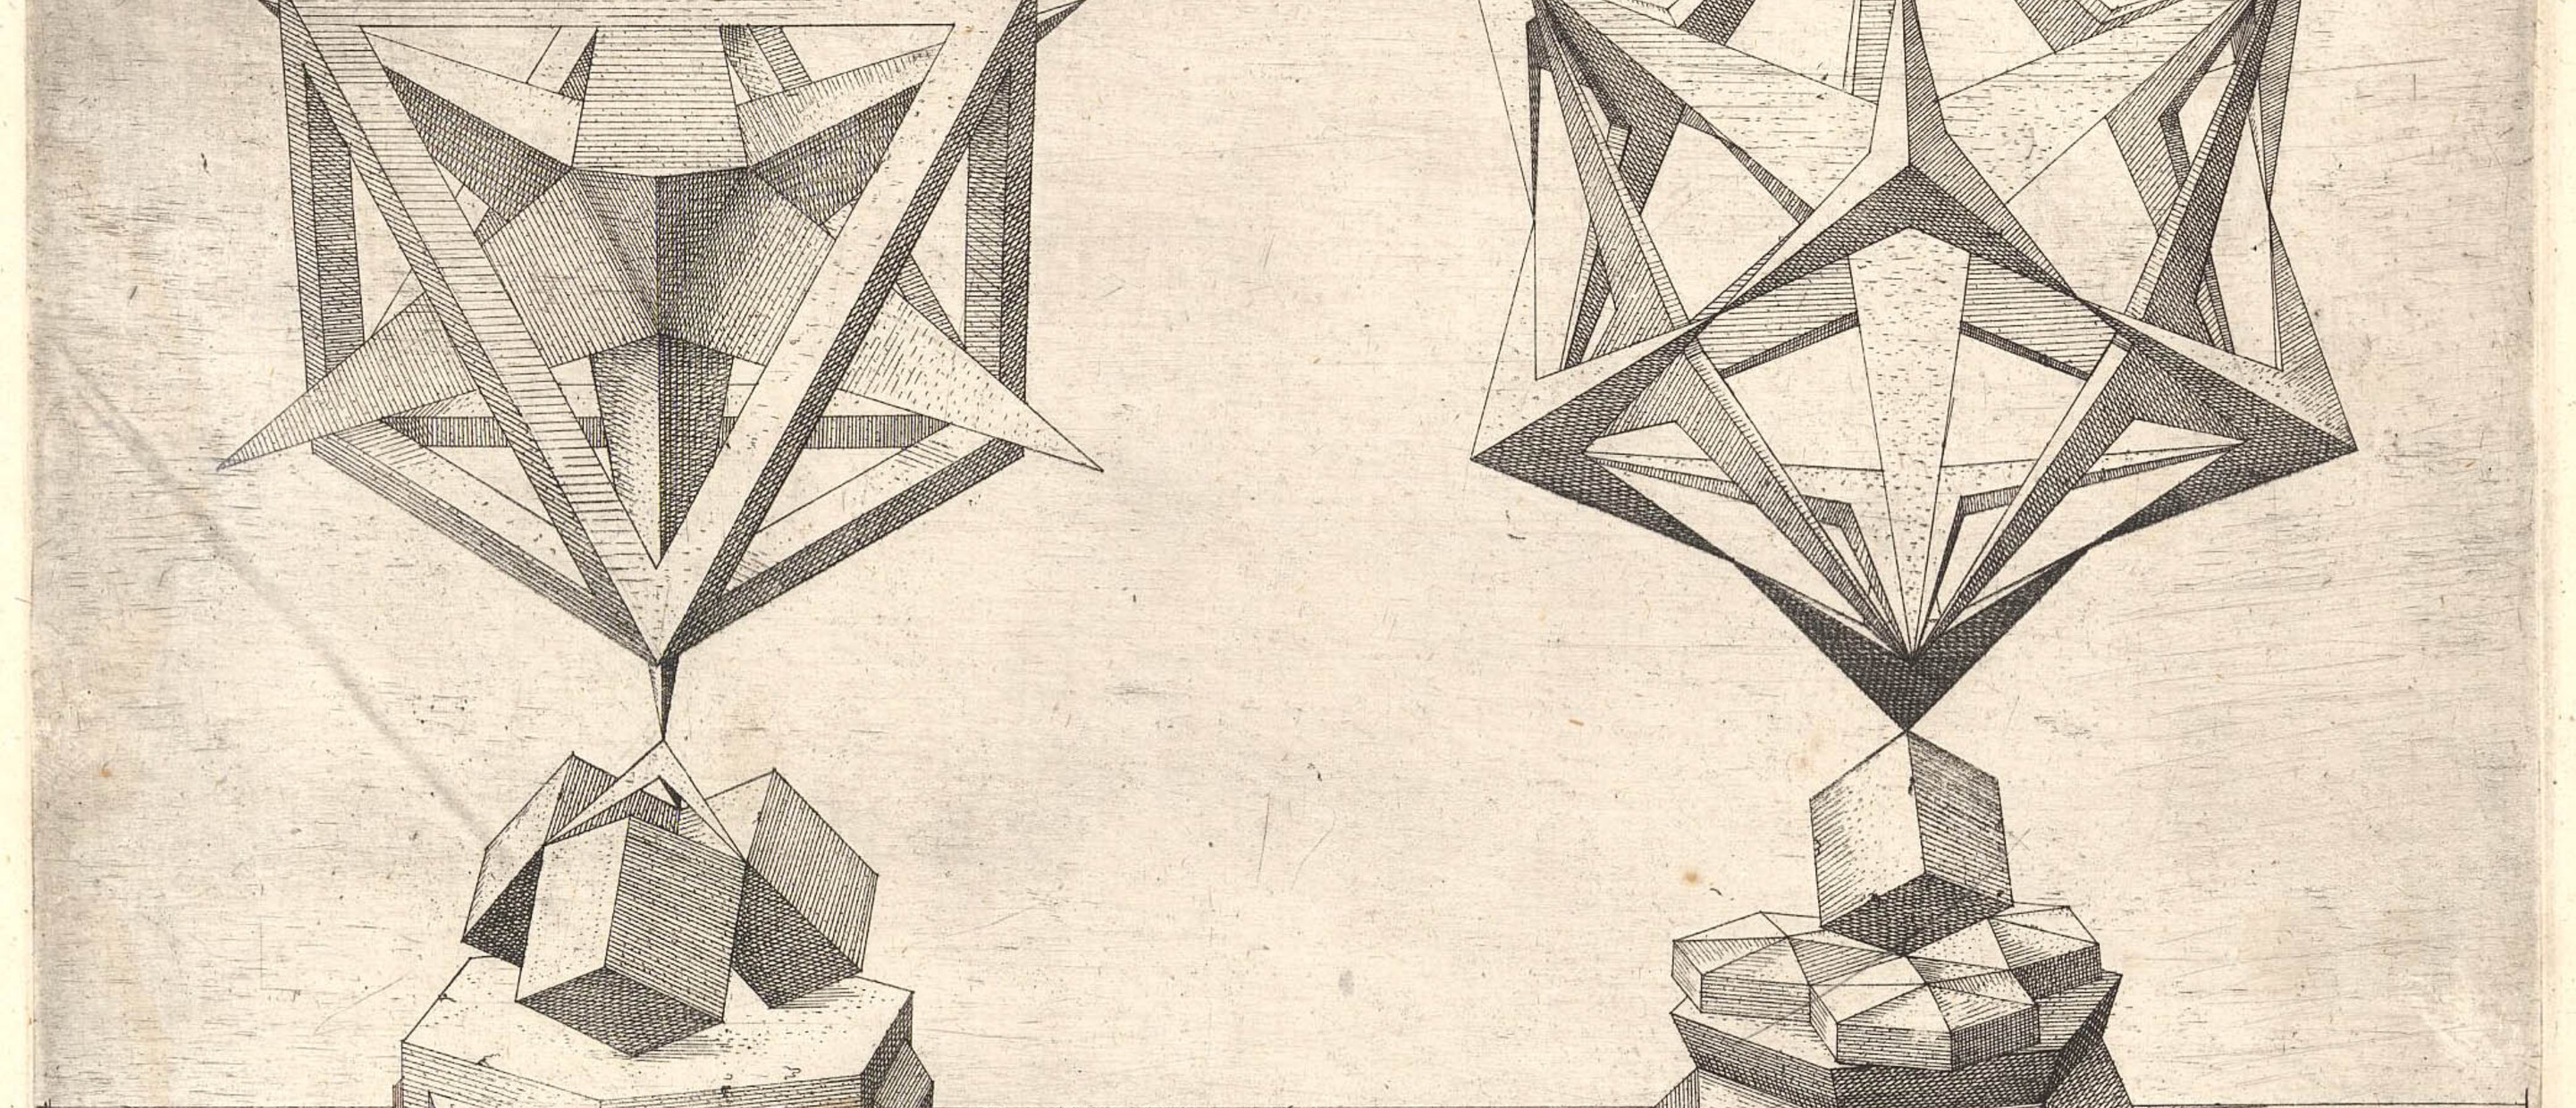 etching of two geometric shapes from different perspectives